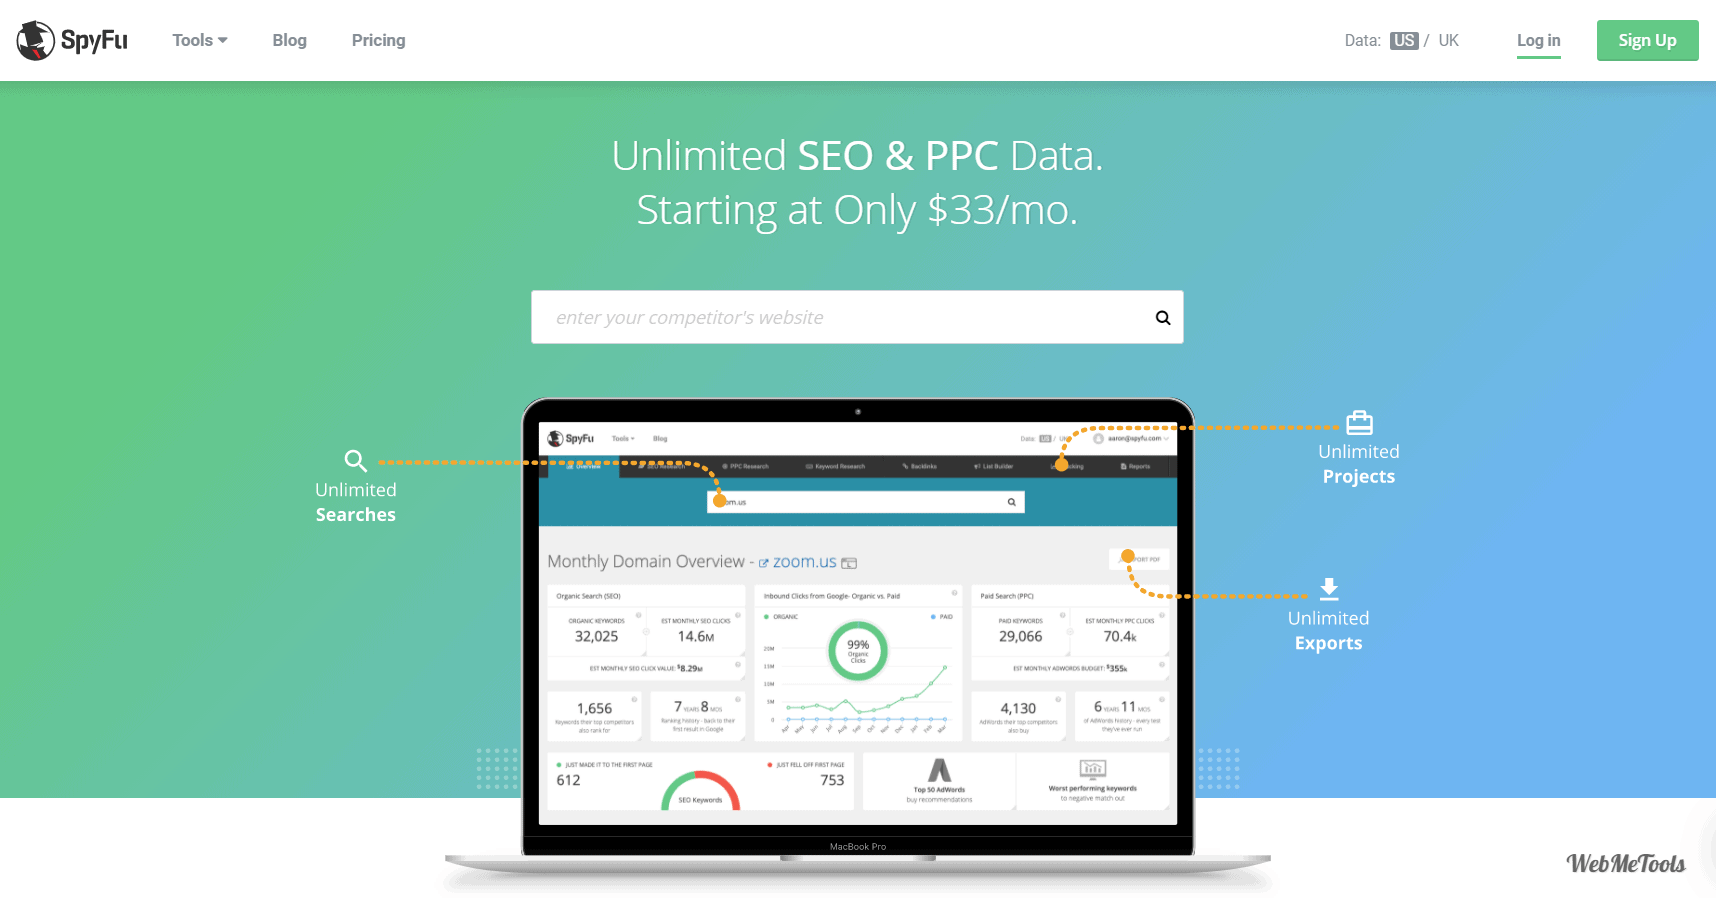 SpyFu Competitor Keyword Research Tools home